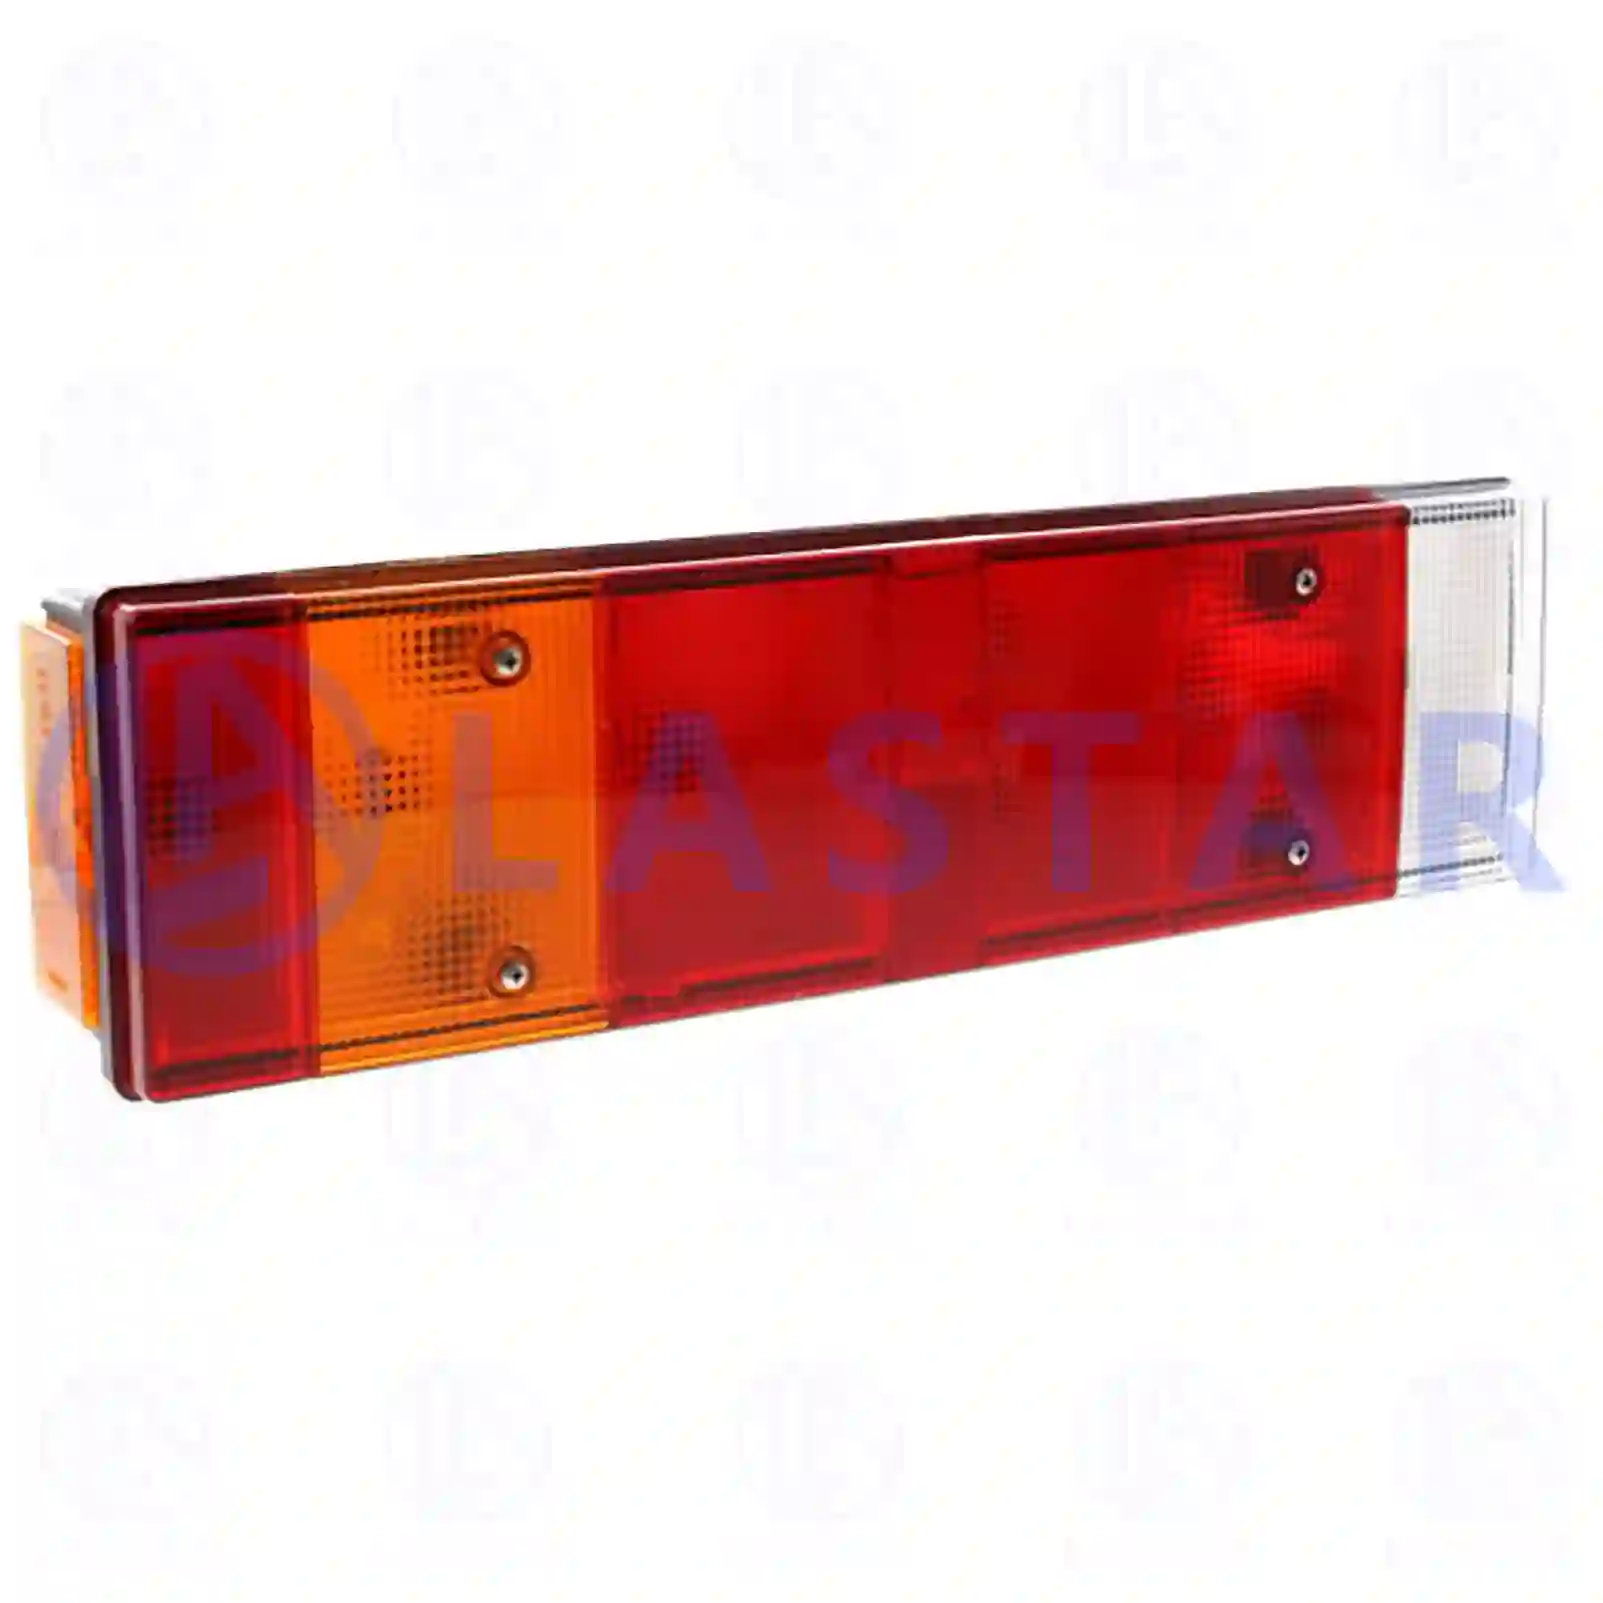 Tail lamp, left, without bulb, 77711246, 1522232, 504094709, 99463243, ||  77711246 Lastar Spare Part | Truck Spare Parts, Auotomotive Spare Parts Tail lamp, left, without bulb, 77711246, 1522232, 504094709, 99463243, ||  77711246 Lastar Spare Part | Truck Spare Parts, Auotomotive Spare Parts